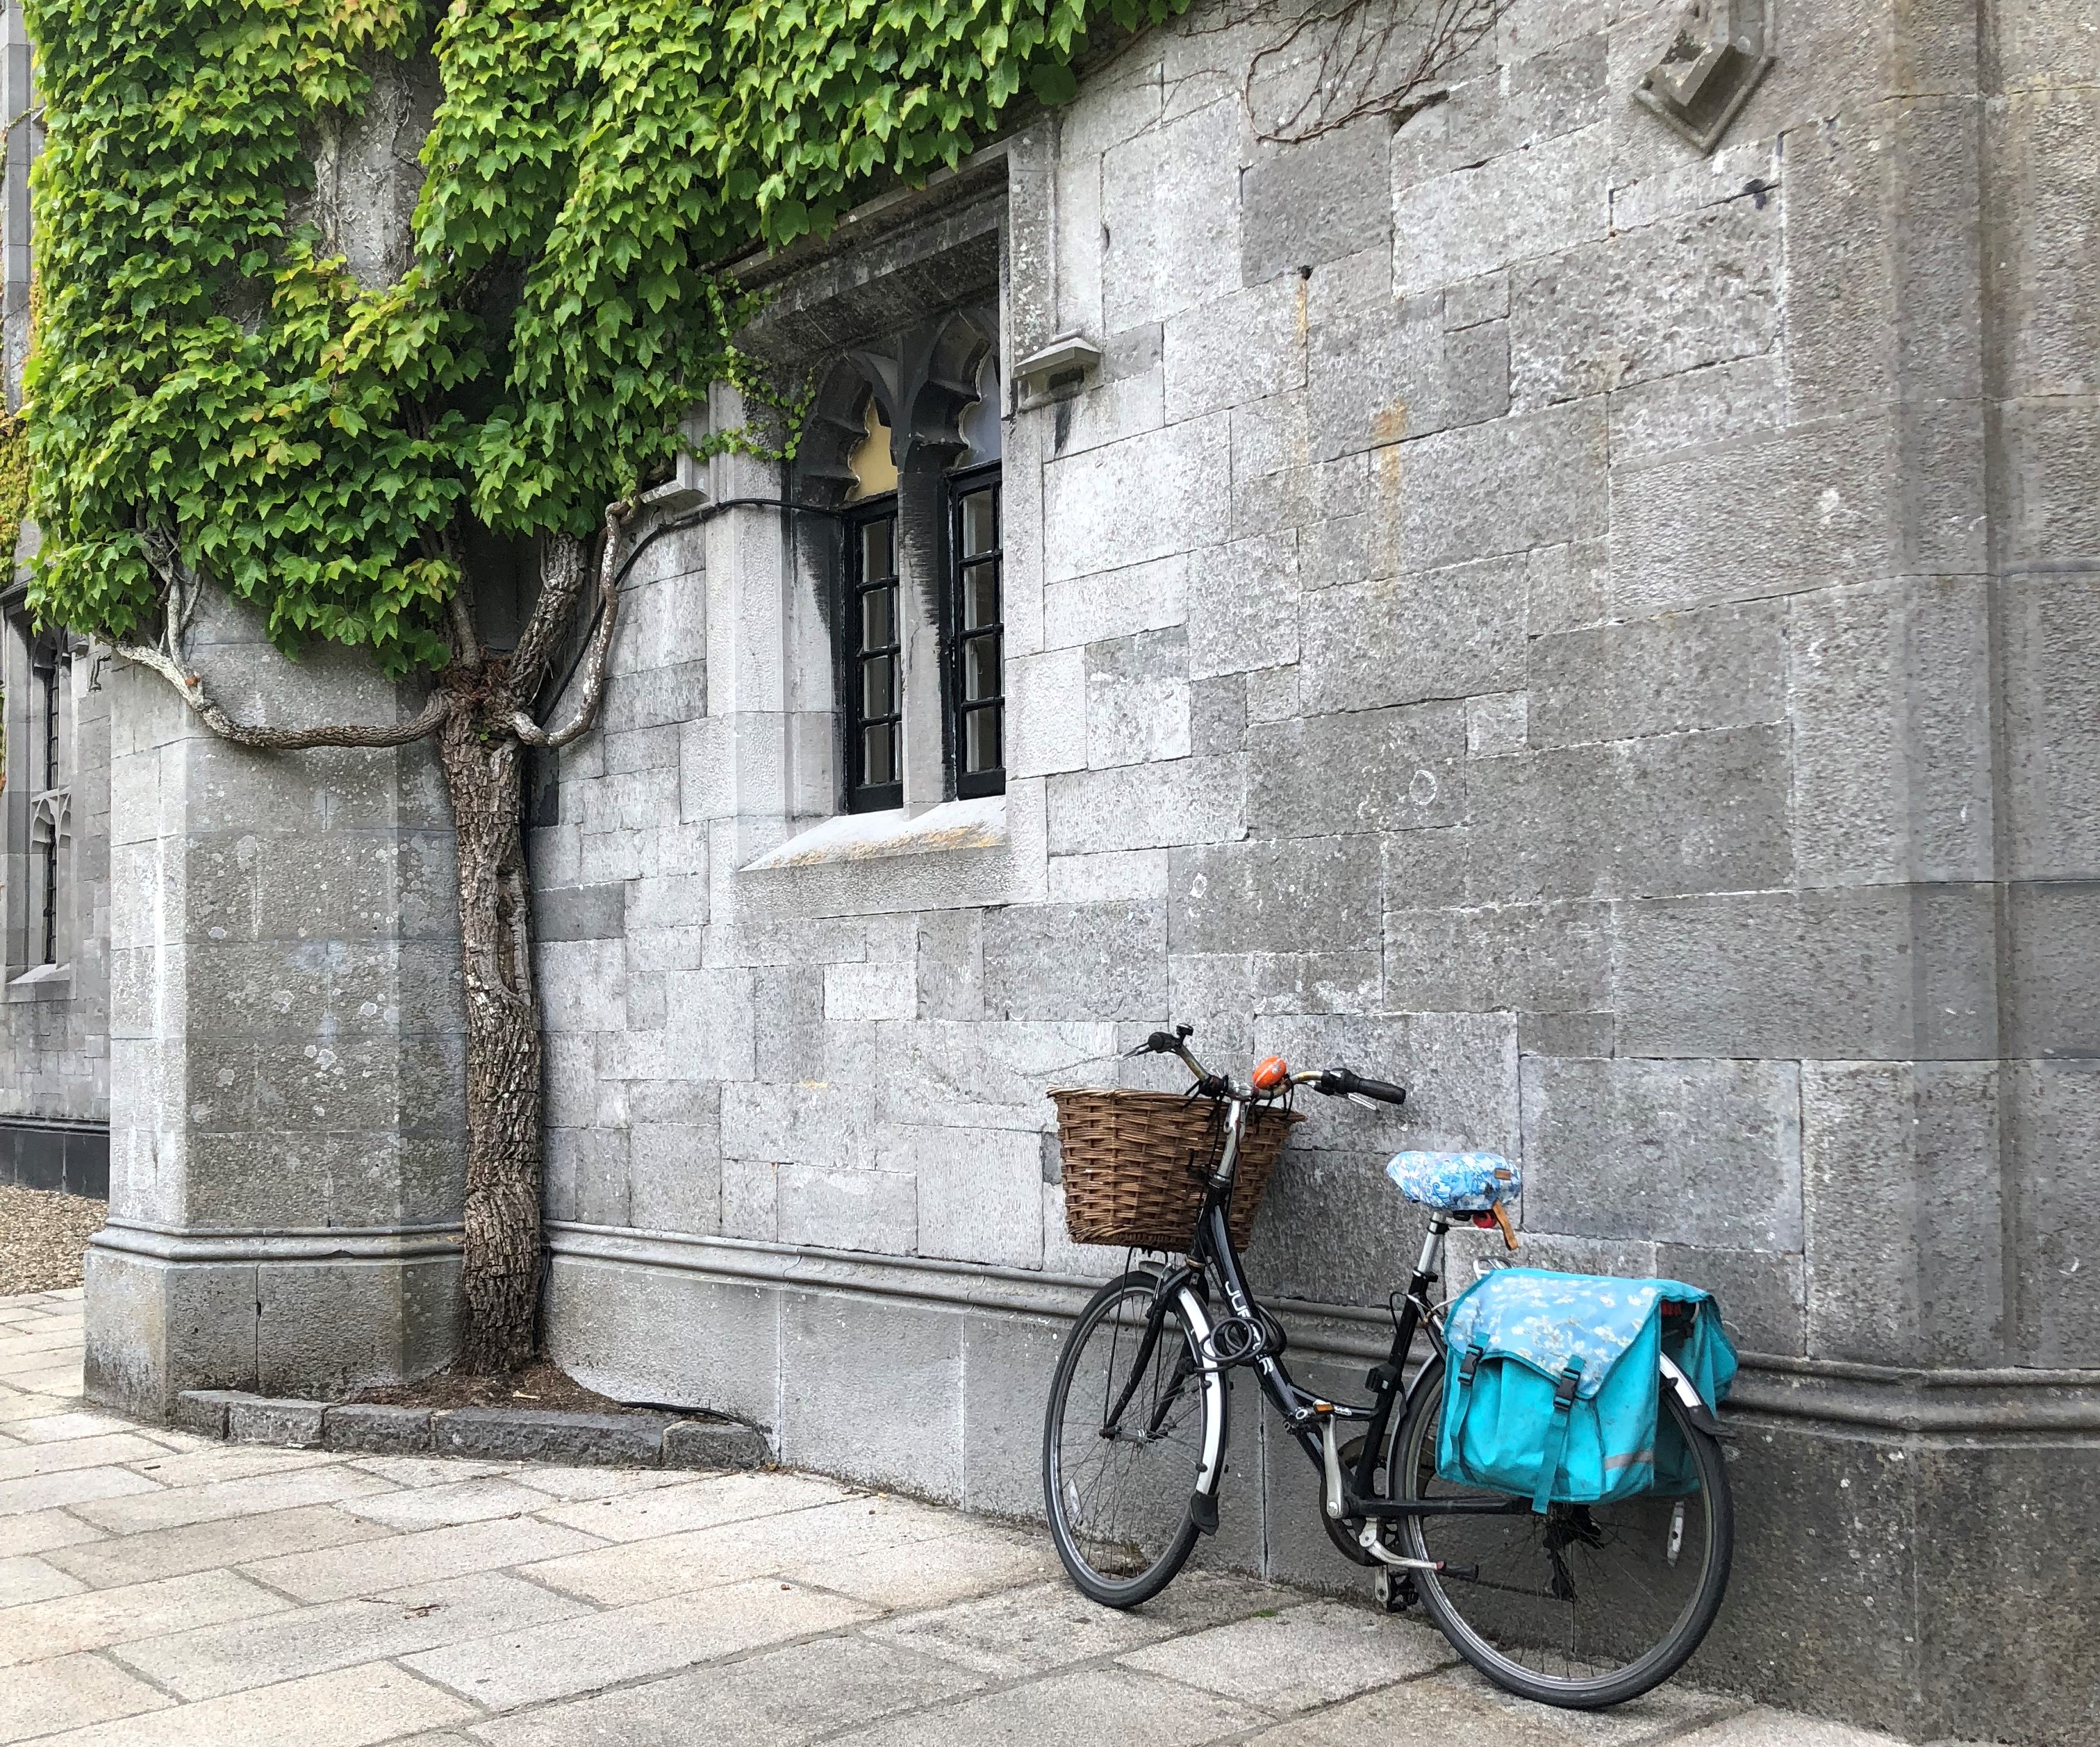 a bike with a blue basket leaning against a stone wall, Galway, Ireland, Jul 2018